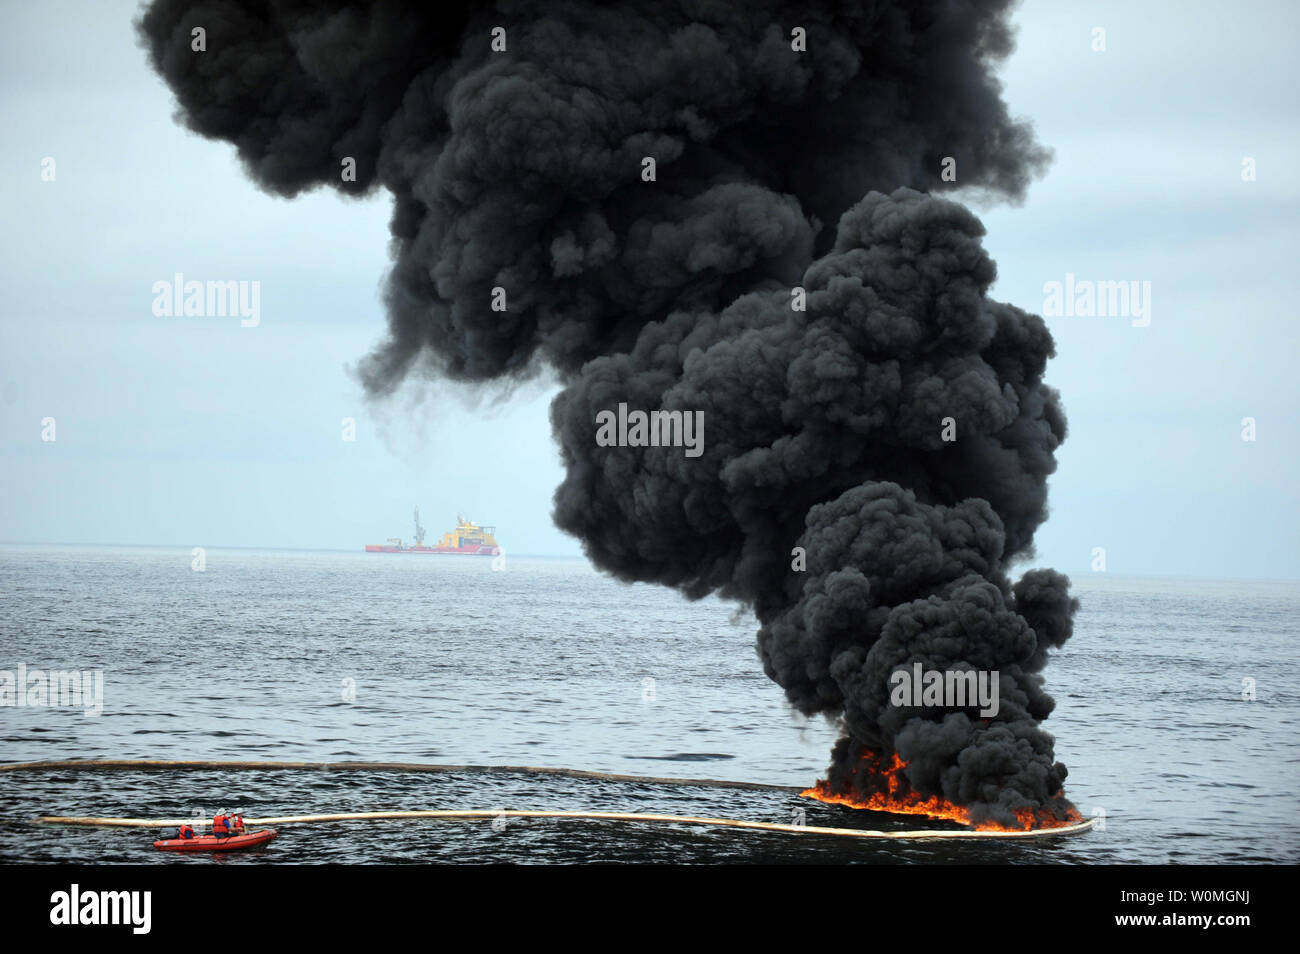 Gathered concentrated oil burns during a controlled oil fire in the Gulf of Mexico on May 5, 2010. The U.S. Coast Guard working in partnership with BP PLC, local residents, and other federal agencies conducted the 'in situ burn' to aid in preventing the spread of oil following the April 20 explosion on Mobile Offshore Drilling Unit Deepwater Horizon.   UPI/Justin E. Stumberg/U.S. Navy Stock Photo